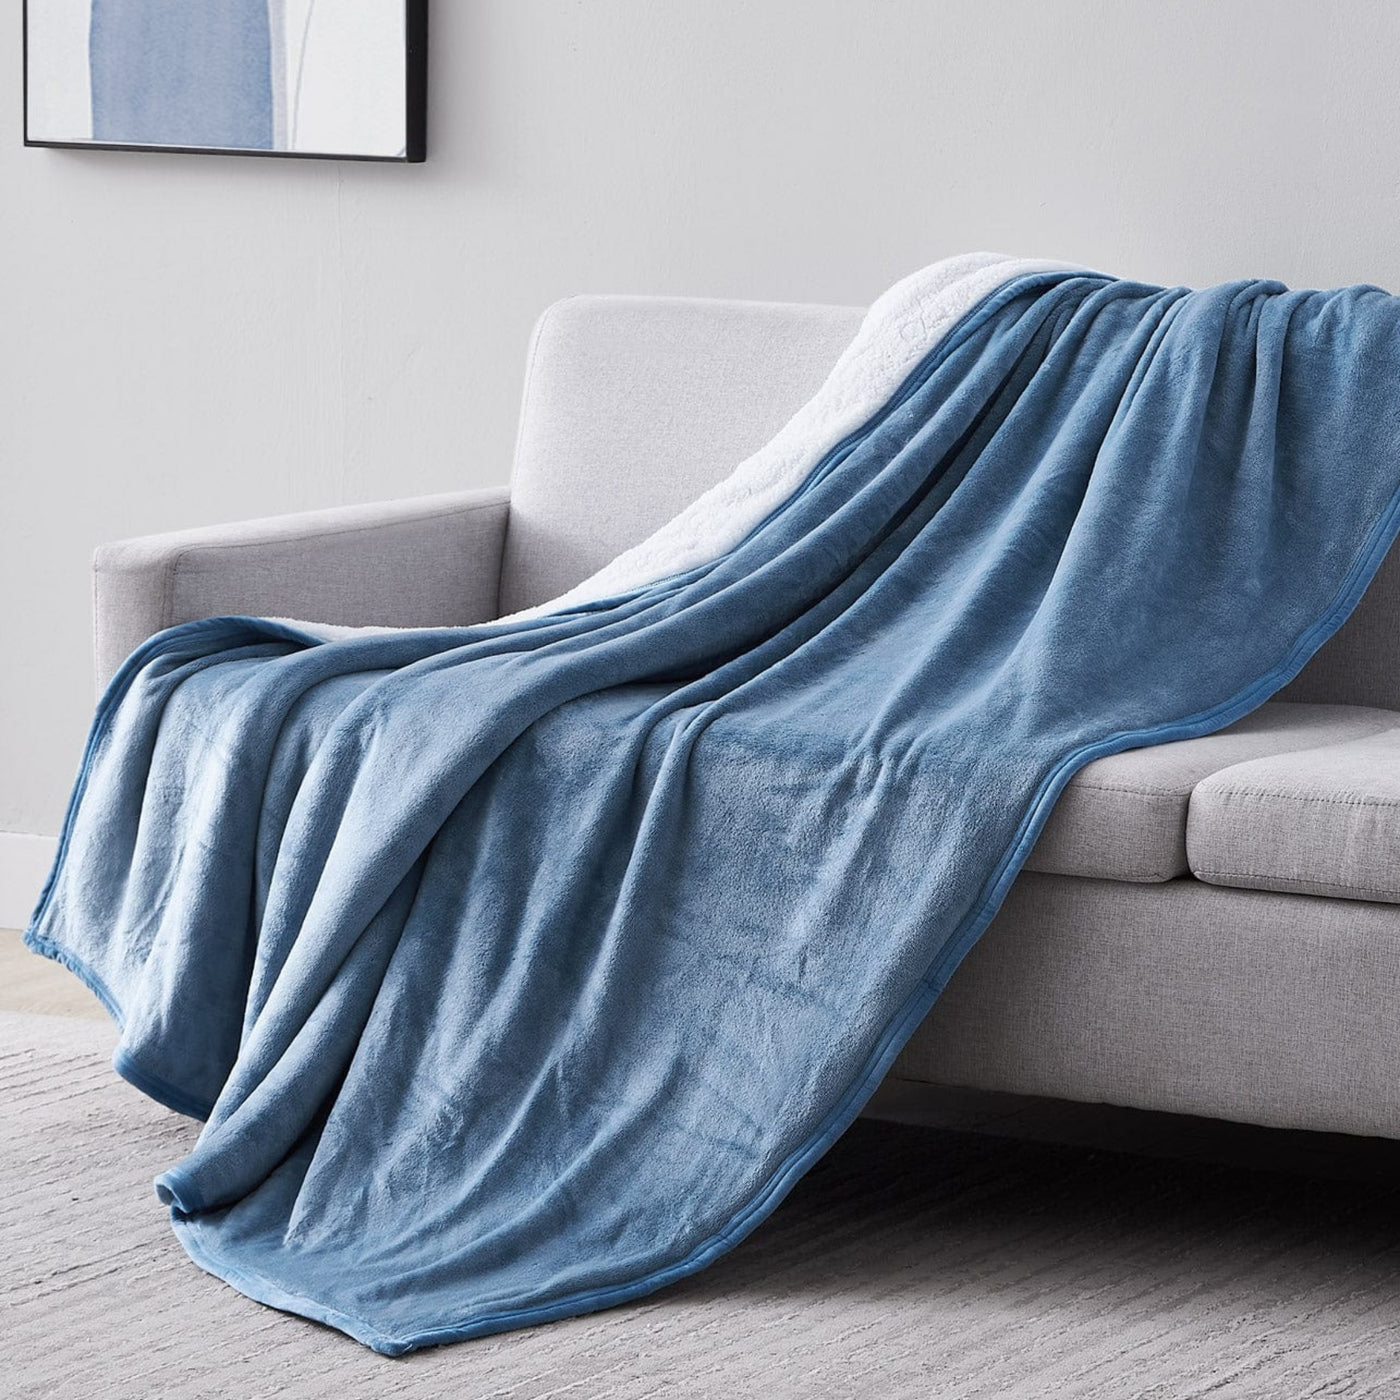 Sherpa-Fleece Oversized Reversible Blankets and Throws in Blue on Sofa#color_microfleece-blue